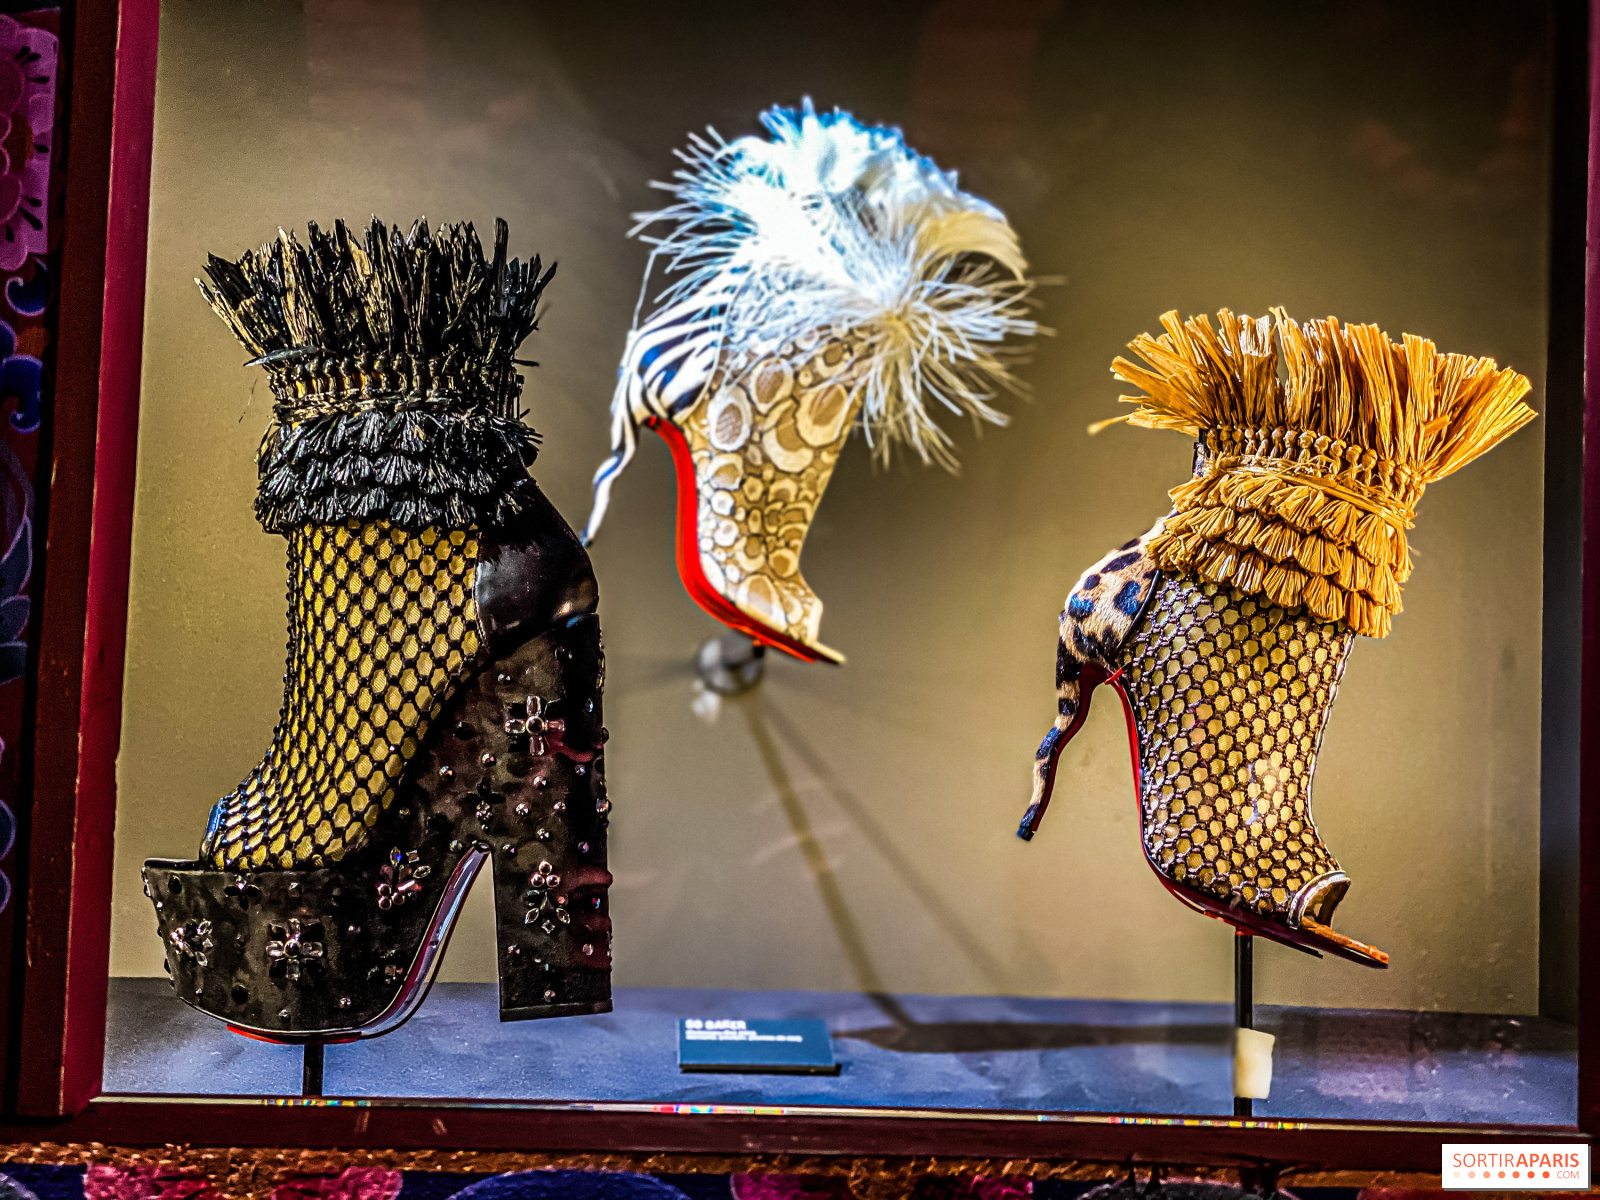 Christian Louboutin Makes Fantasies Come True With The New